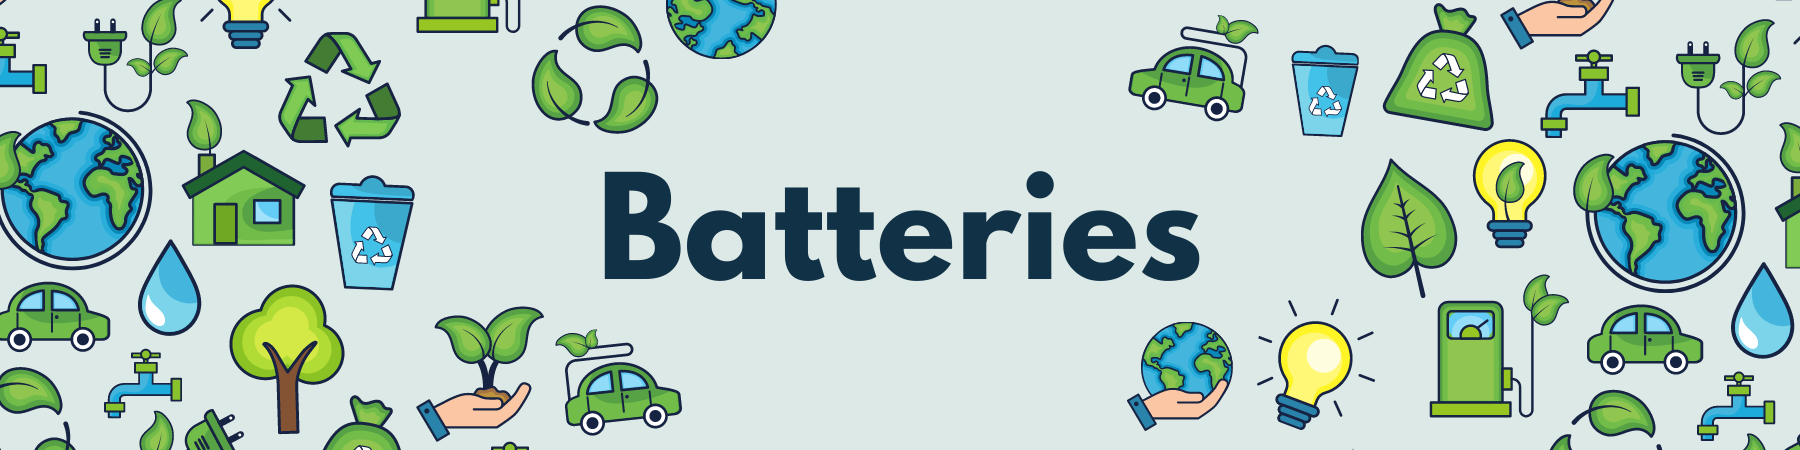 Batteries Page Banner Image